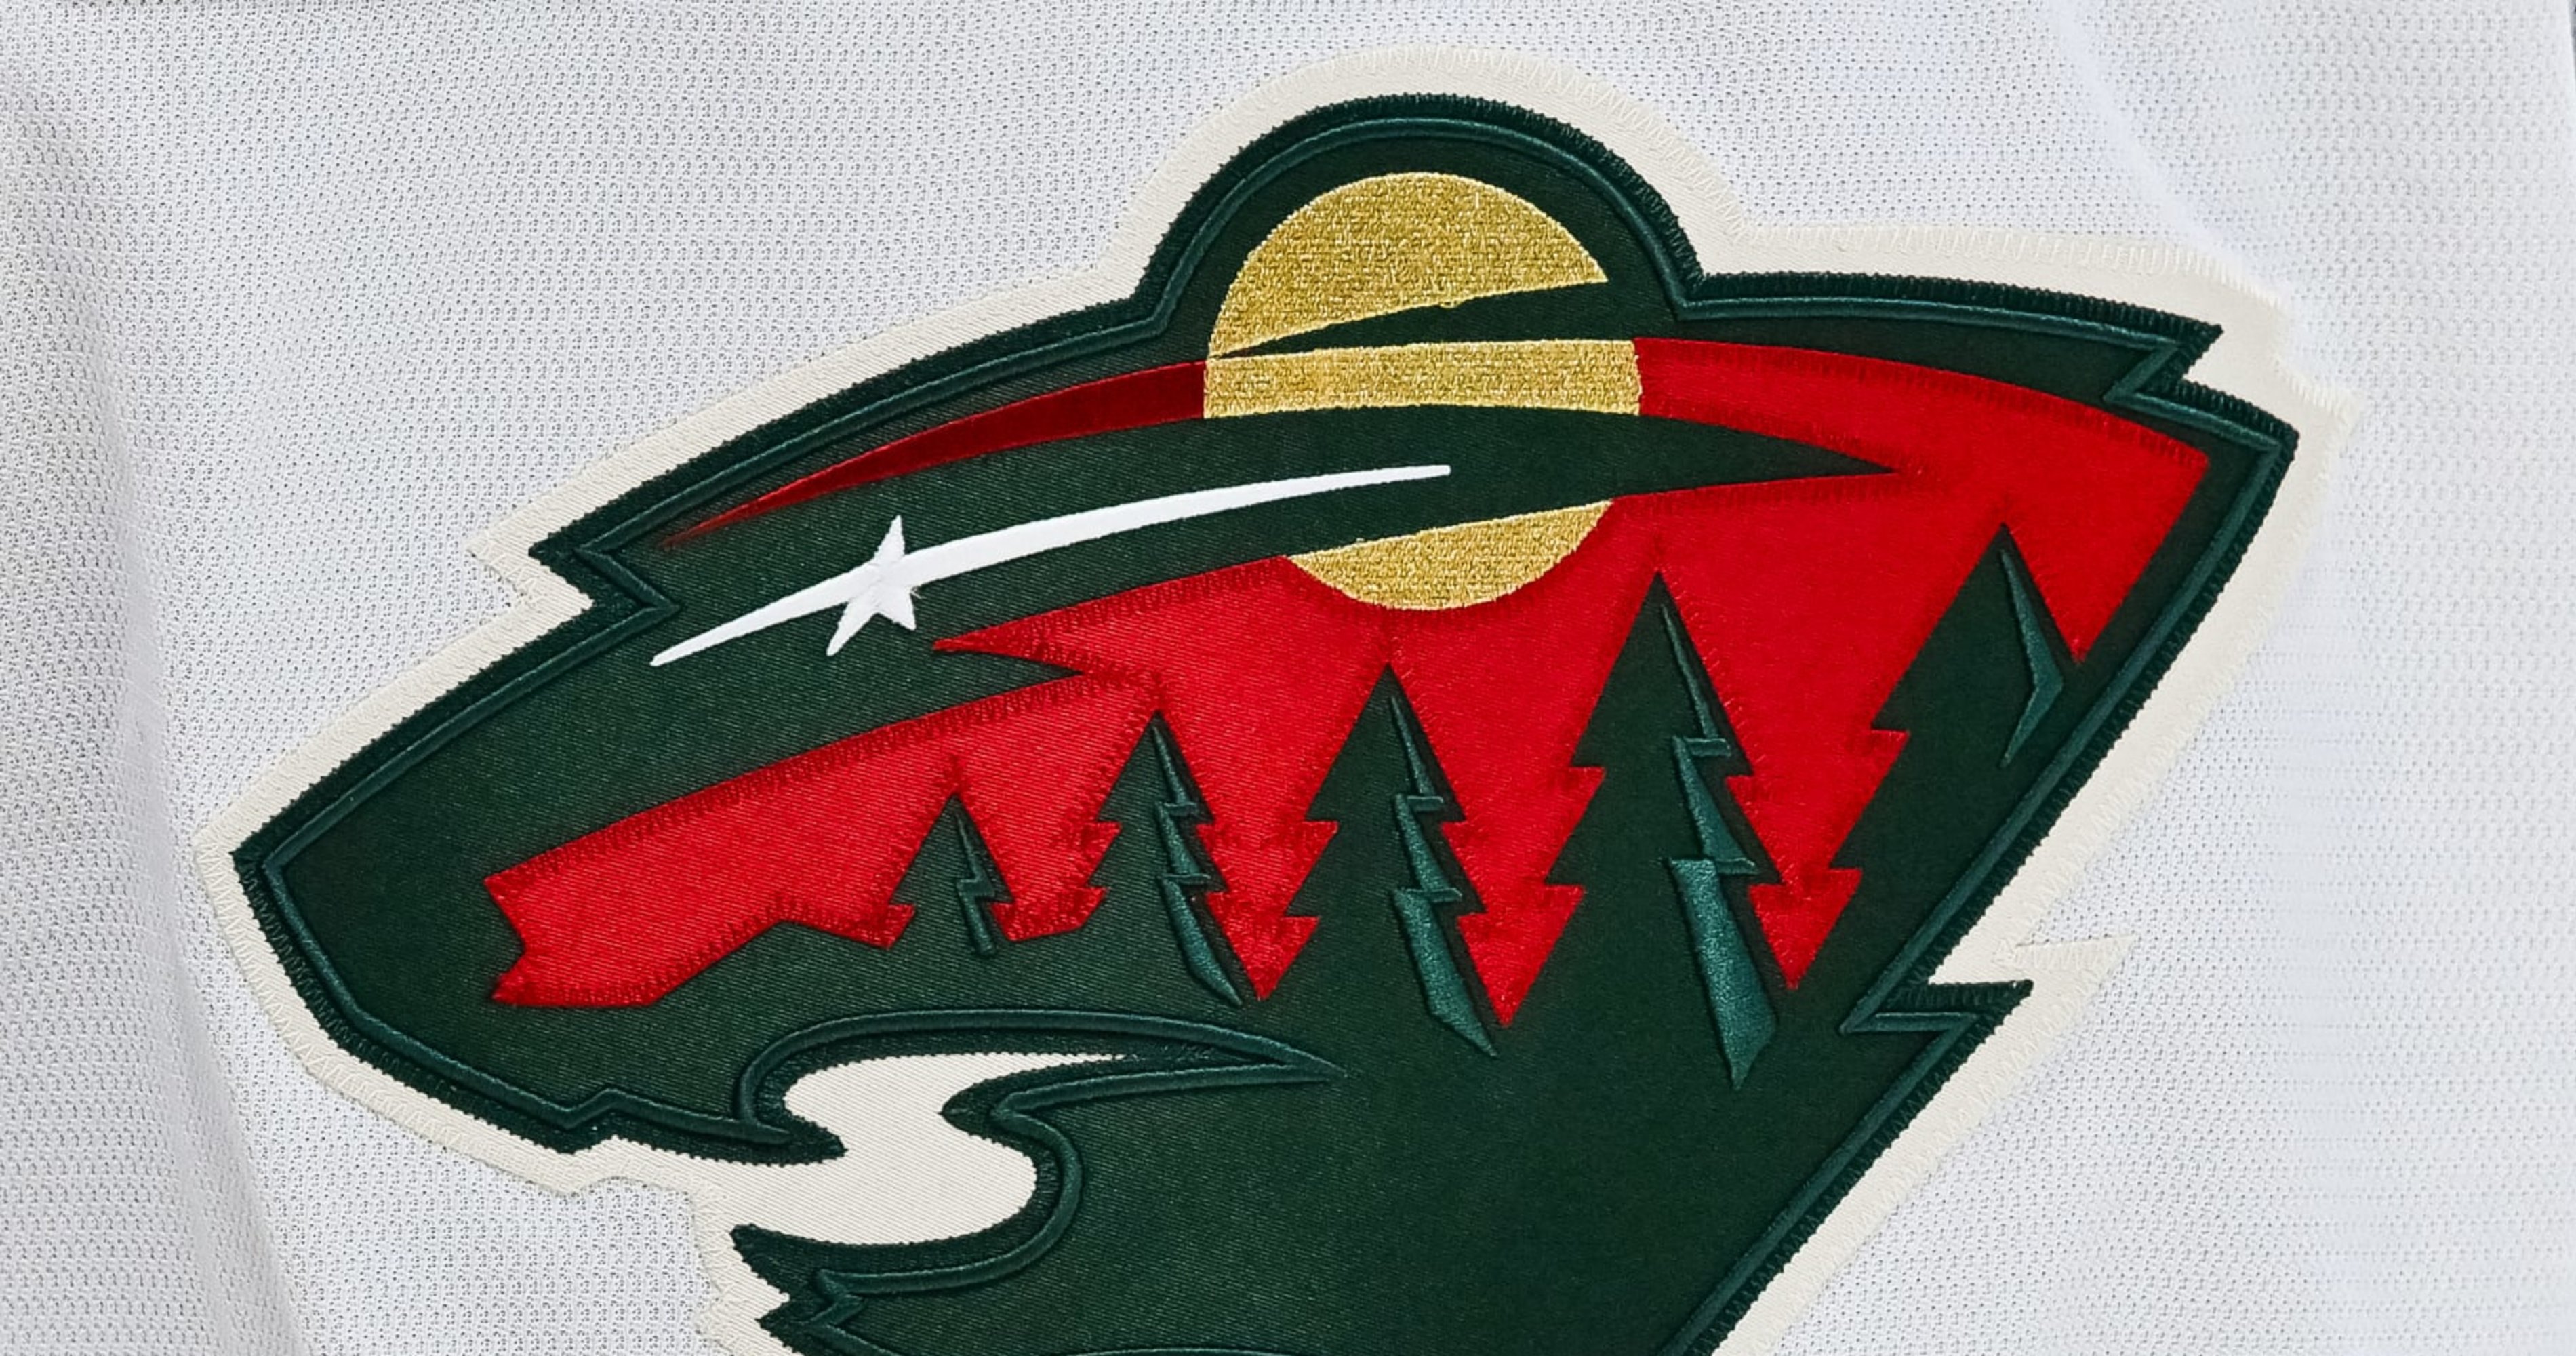 NHL Rumors: Wild to Use North Stars Colors on Uniforms Starting with 2025-26 Season